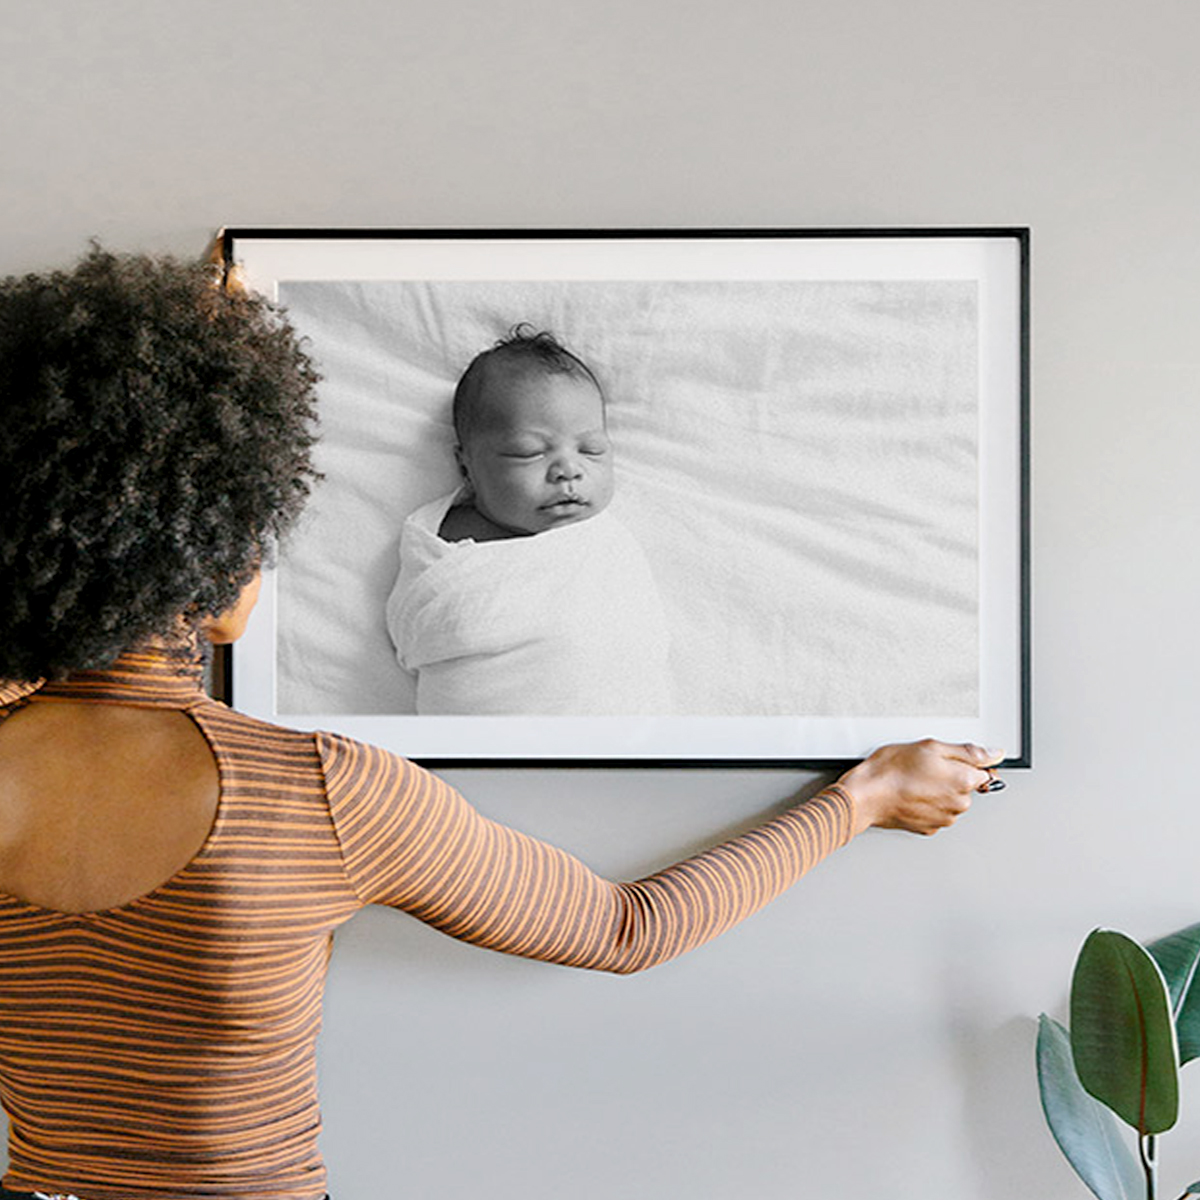 Woman hanging 20 x 30 inch Black Modern Metal Frame on the wall featuring photo of swaddled newborn matted to 16.5 x 26.5 inch